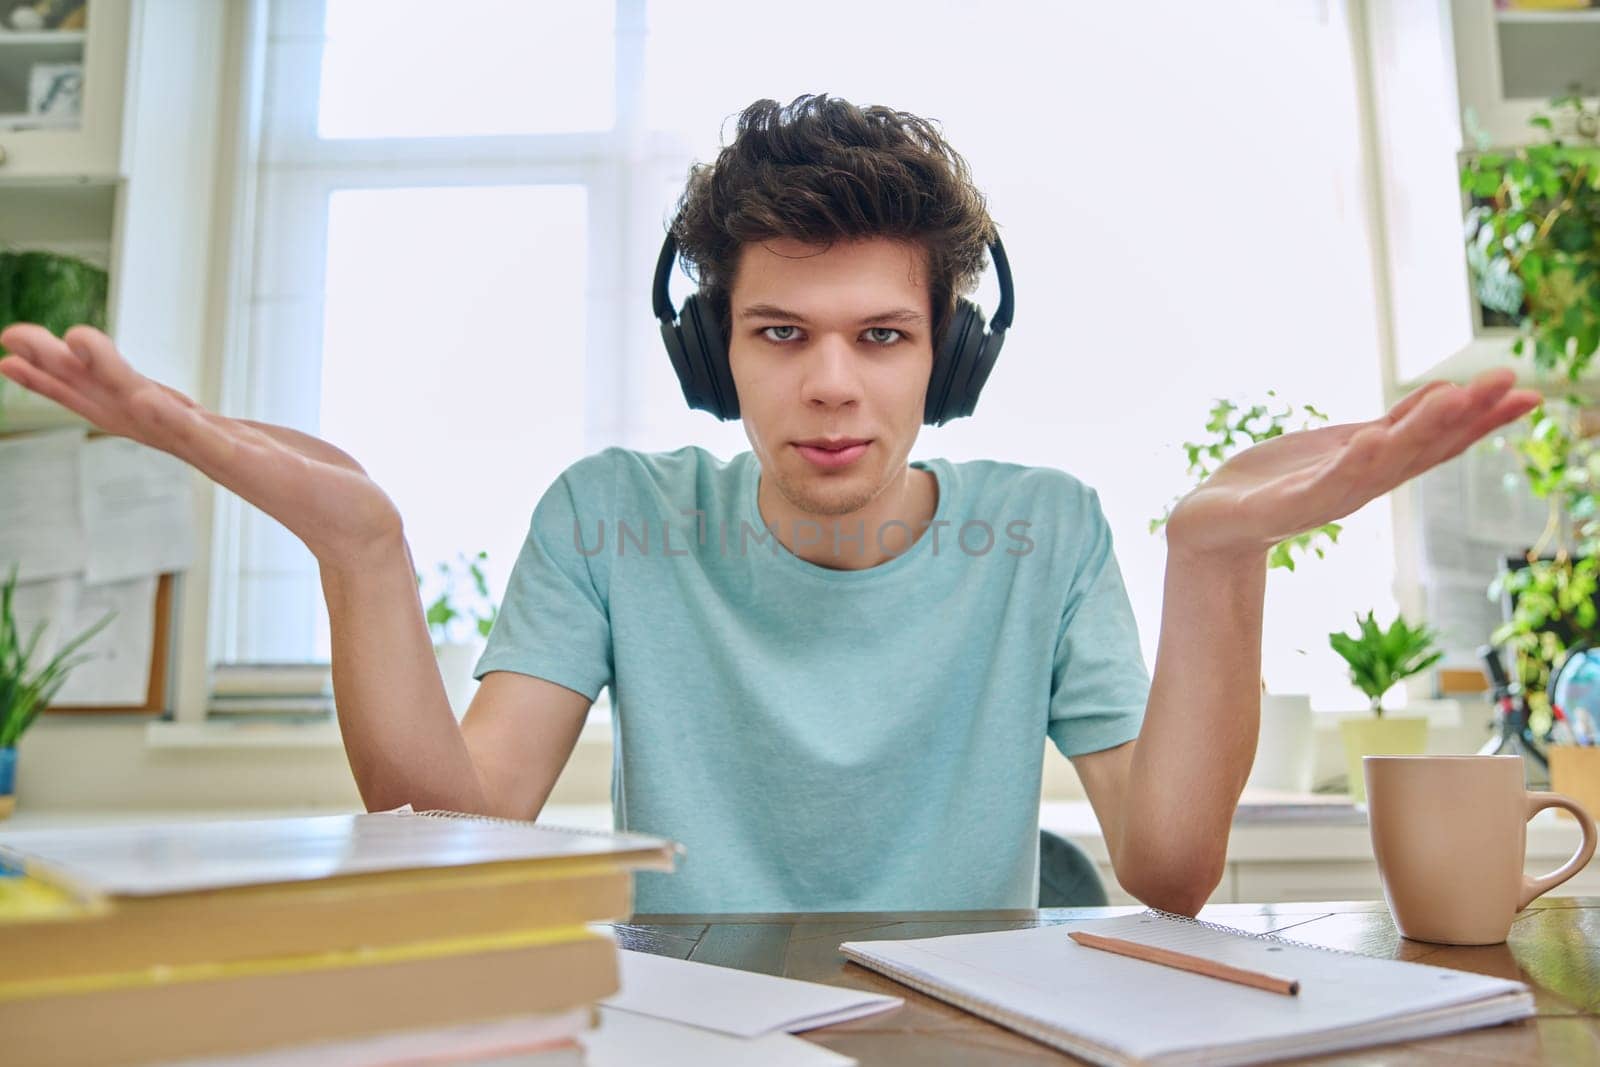 Webcam view of college student guy in headphones, talking looking at camera by VH-studio